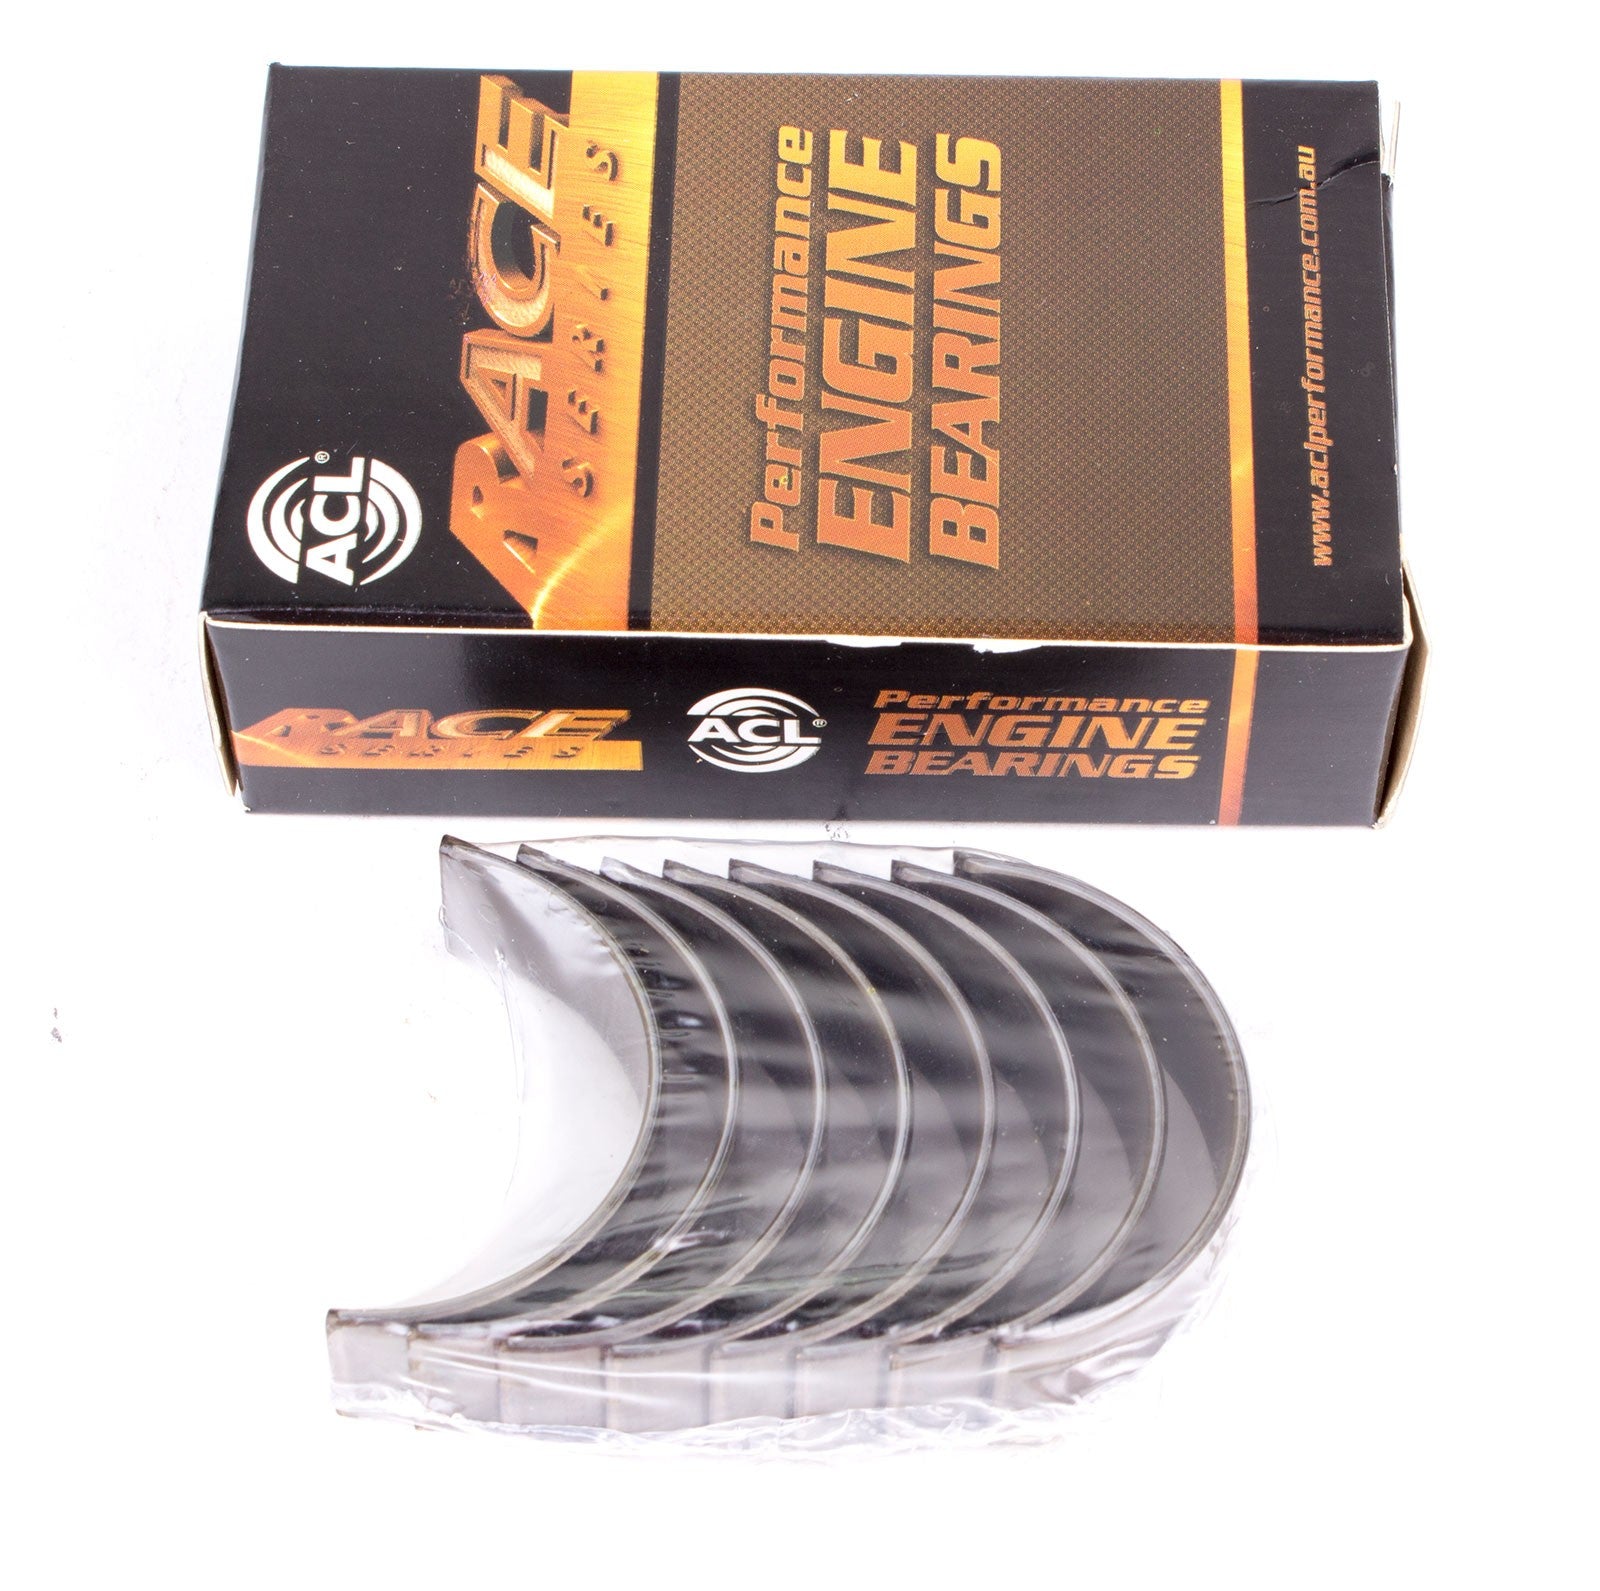 ACL 4SM2222H-001 Main bearing set (ACL Race Series) Photo-0 